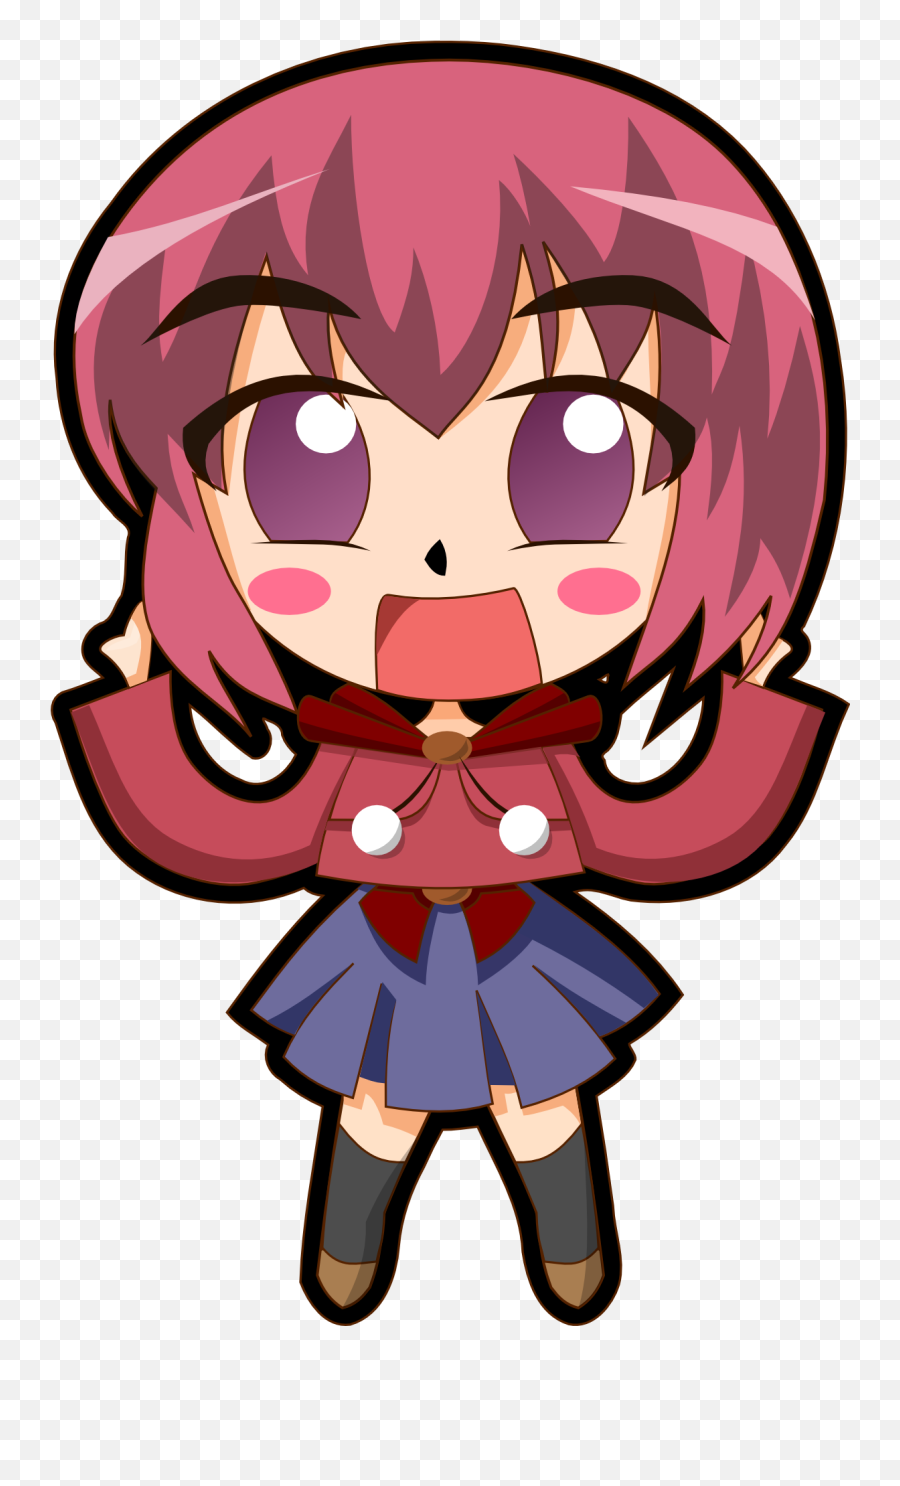 Girl From An Anime Clipart Free Image Download - Anime Girl Cute Clipart Emoji,Chibi Anime Girl Different Emotion